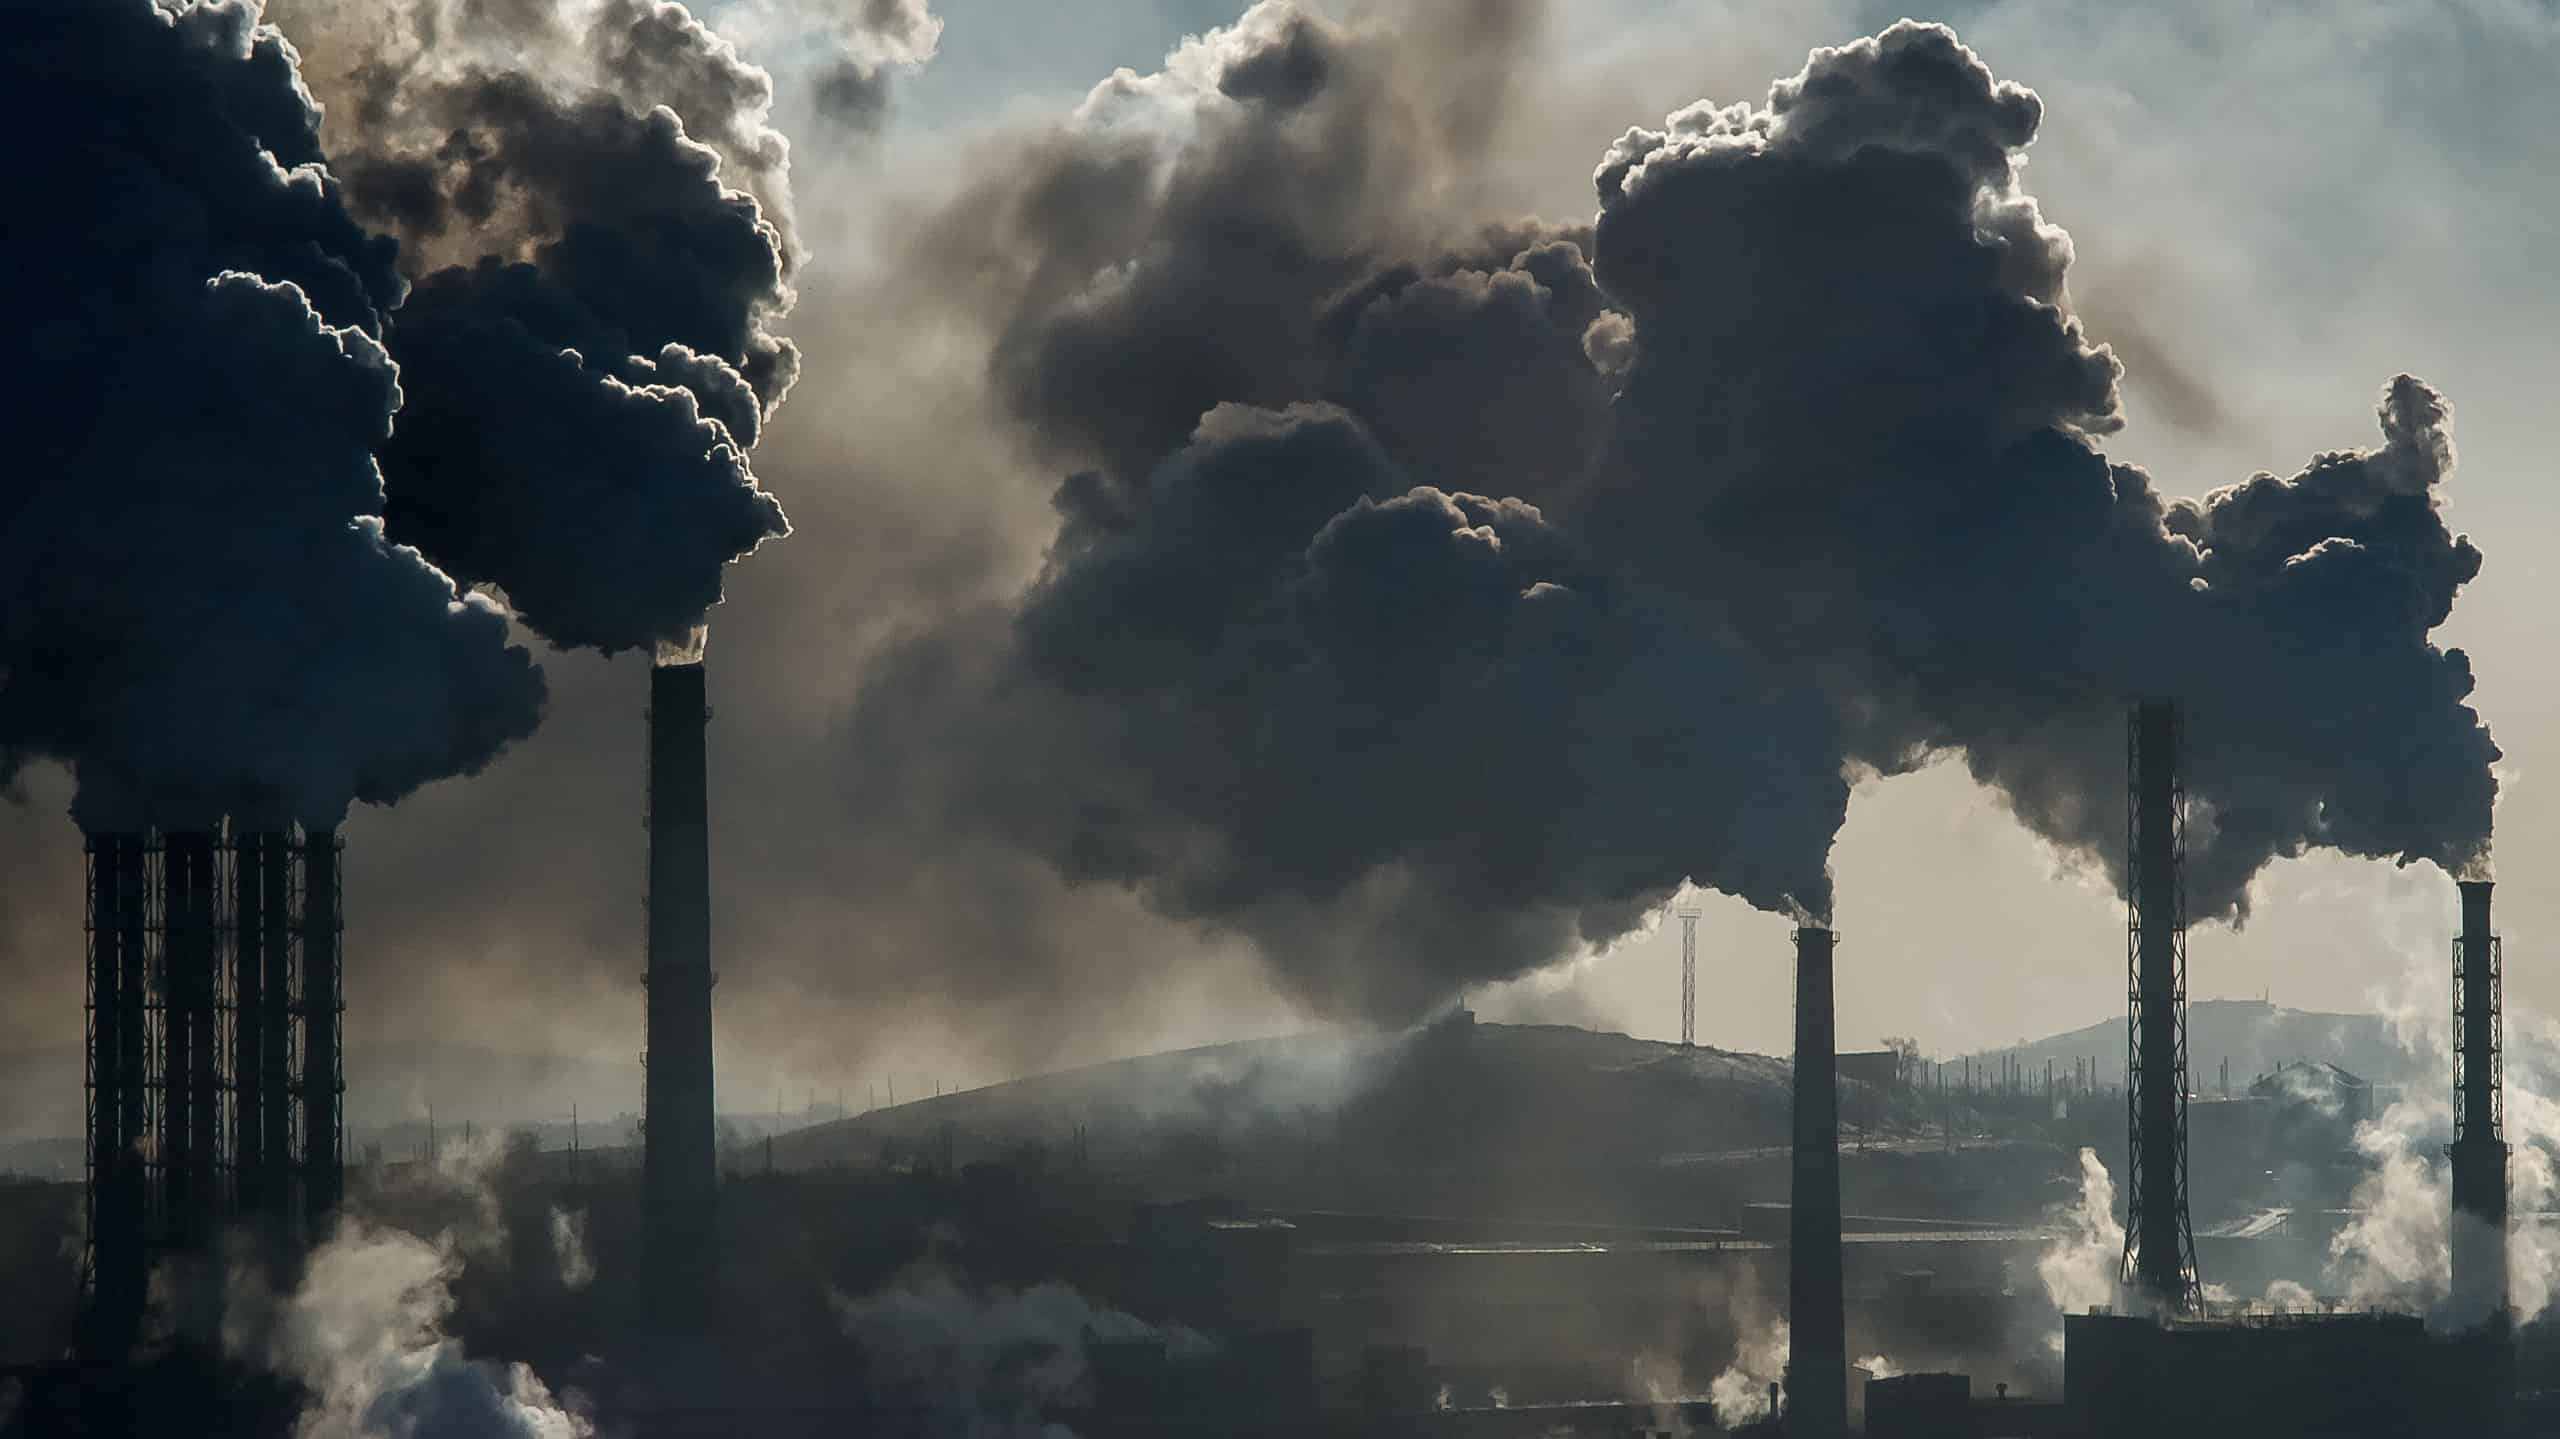 A black cloud of pollution emits from a factory